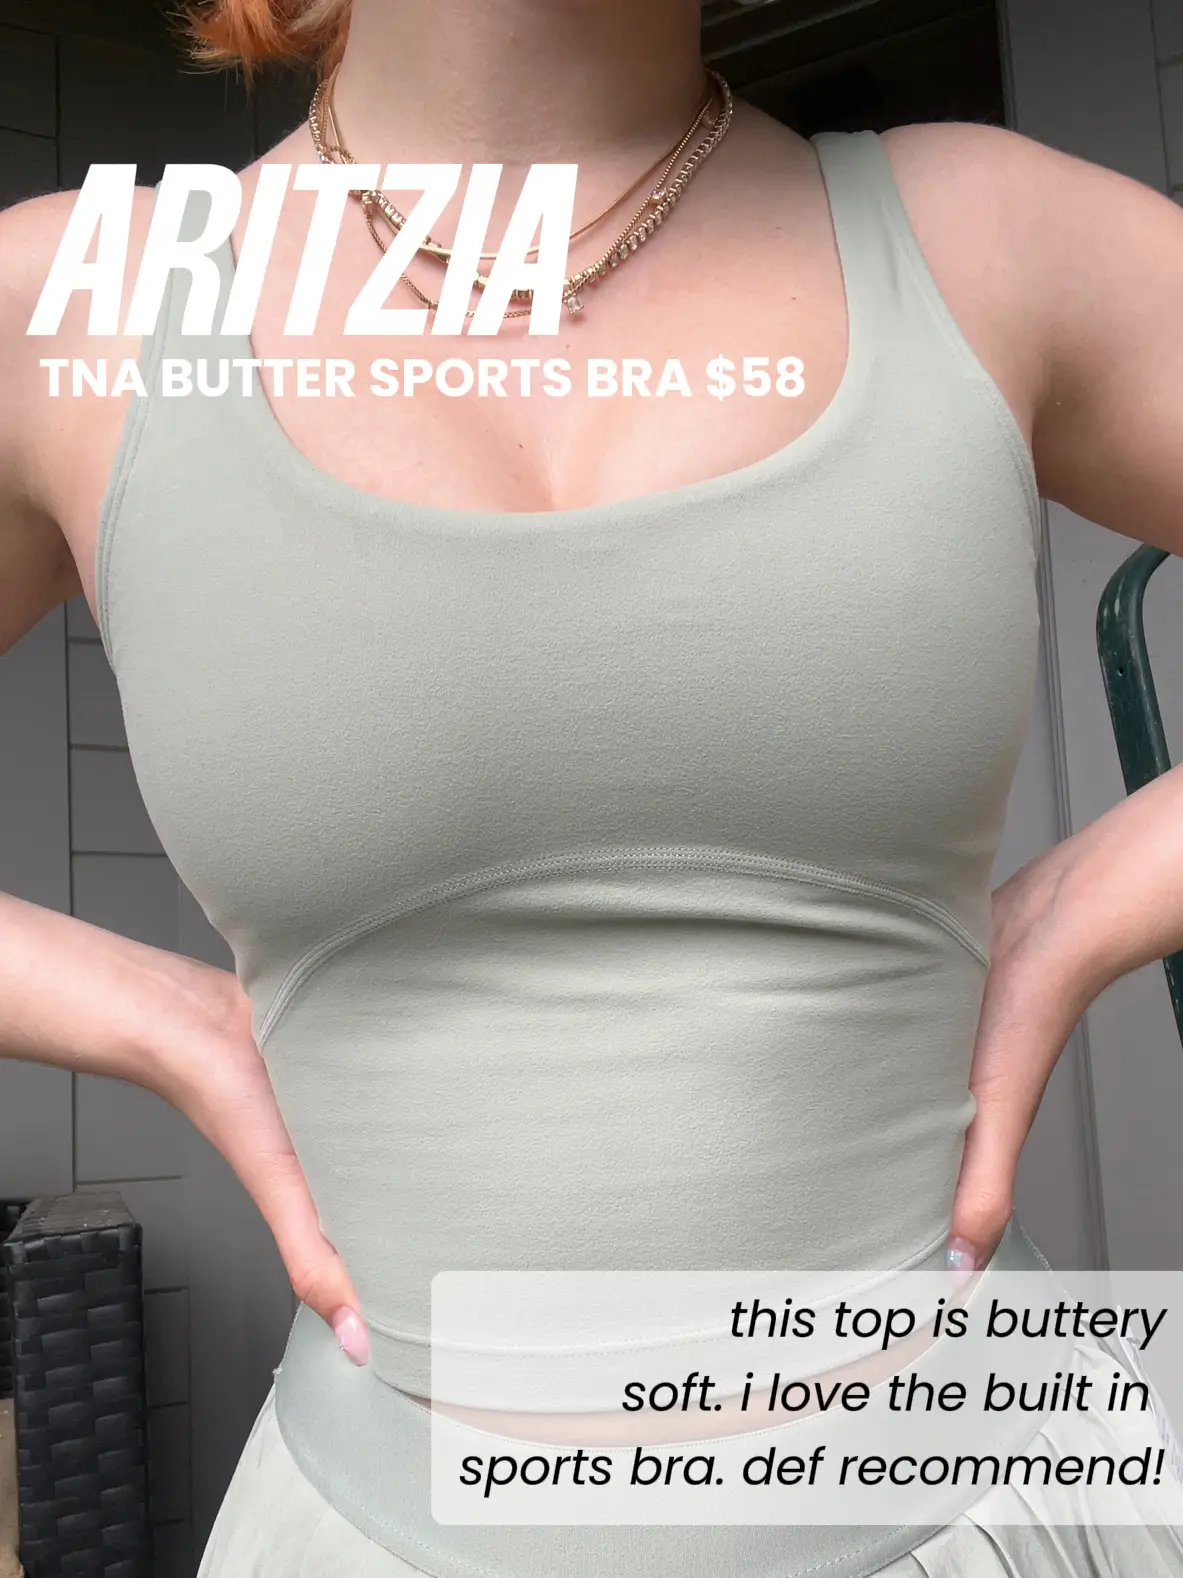 Dear Aritzia, you KNOW I hate wearing bras so why must you make